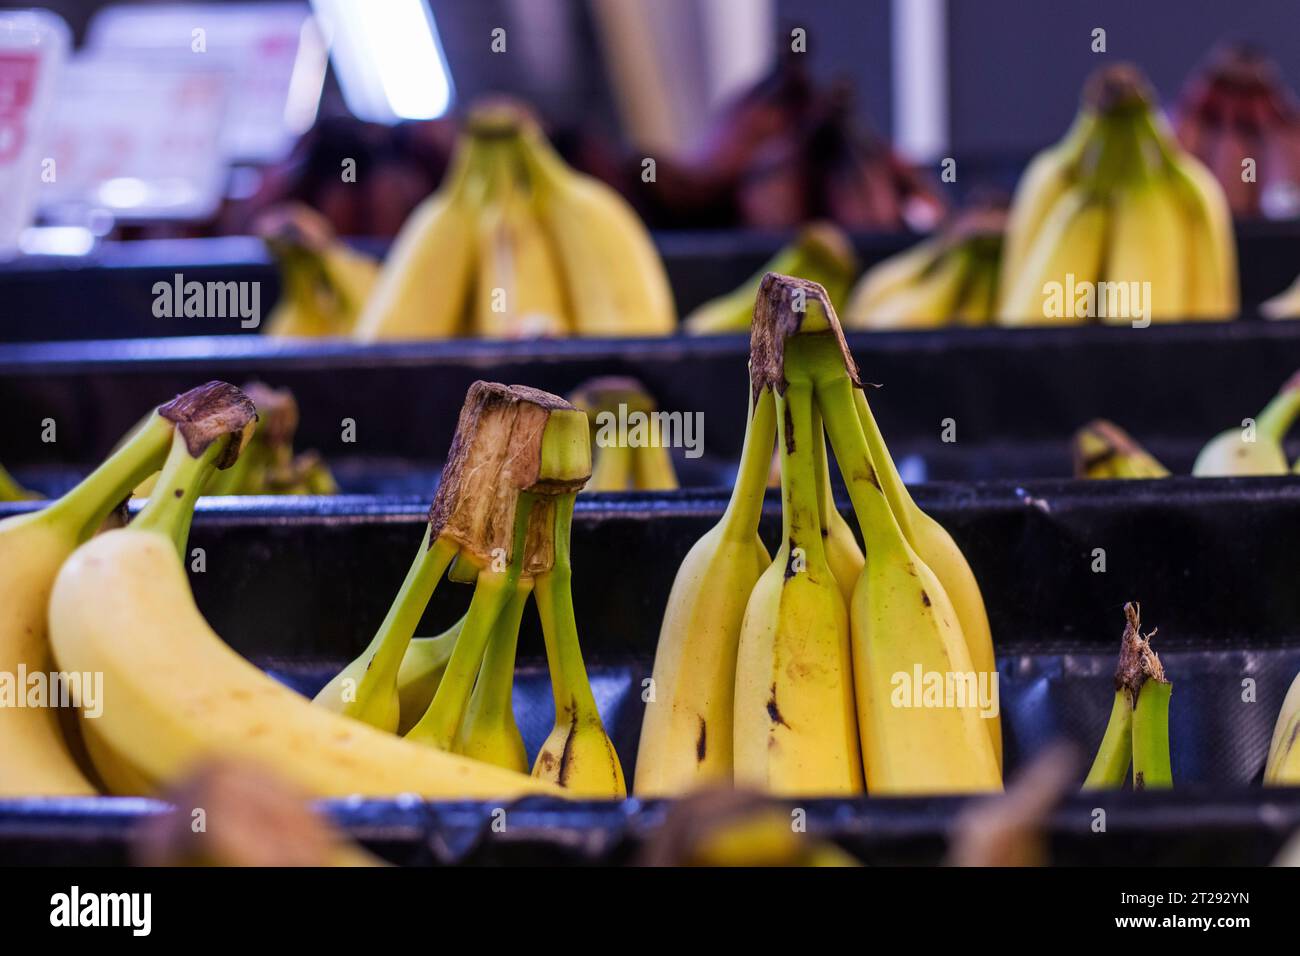 three different types of bananas on the counter in a store Stock Photo